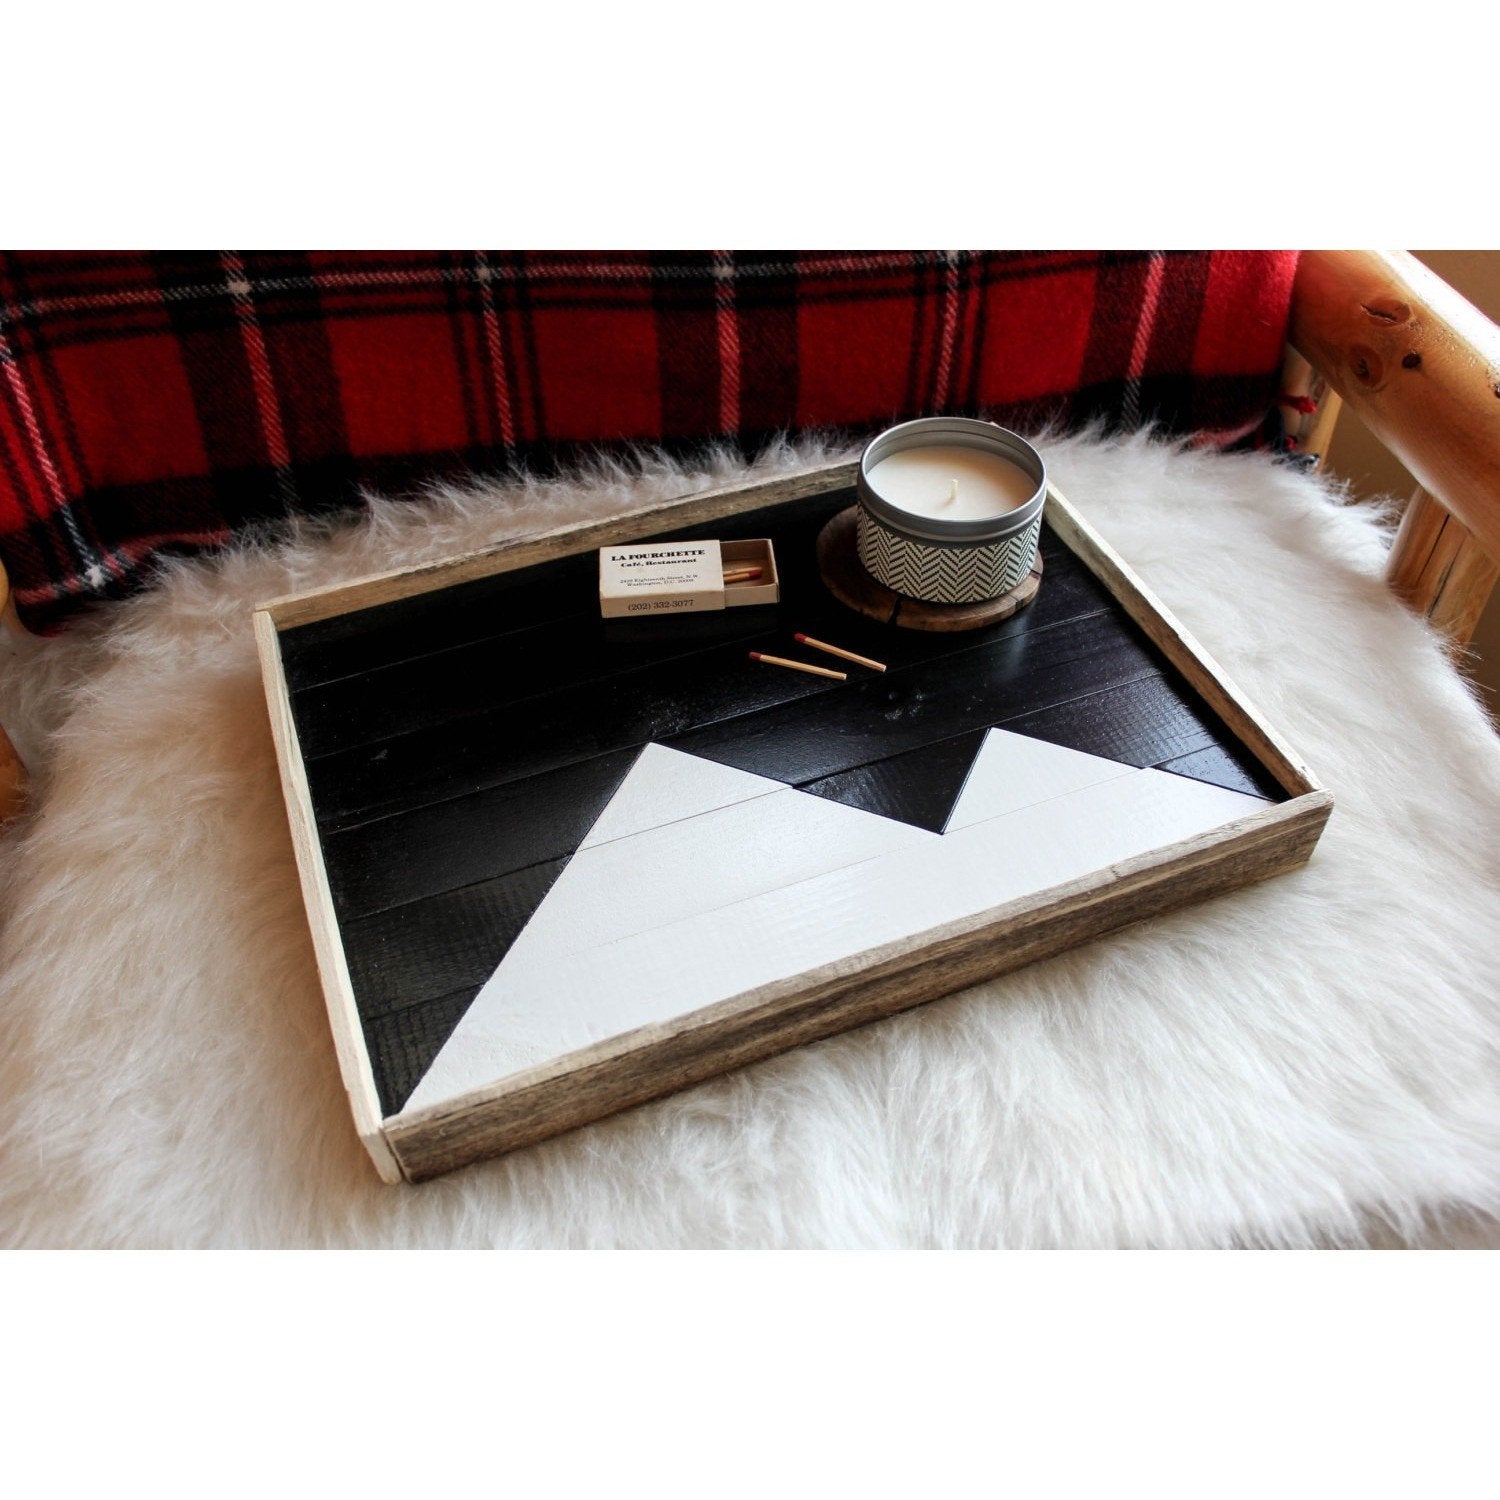 Serving Tray - Black and White Mountains (Wholesale)